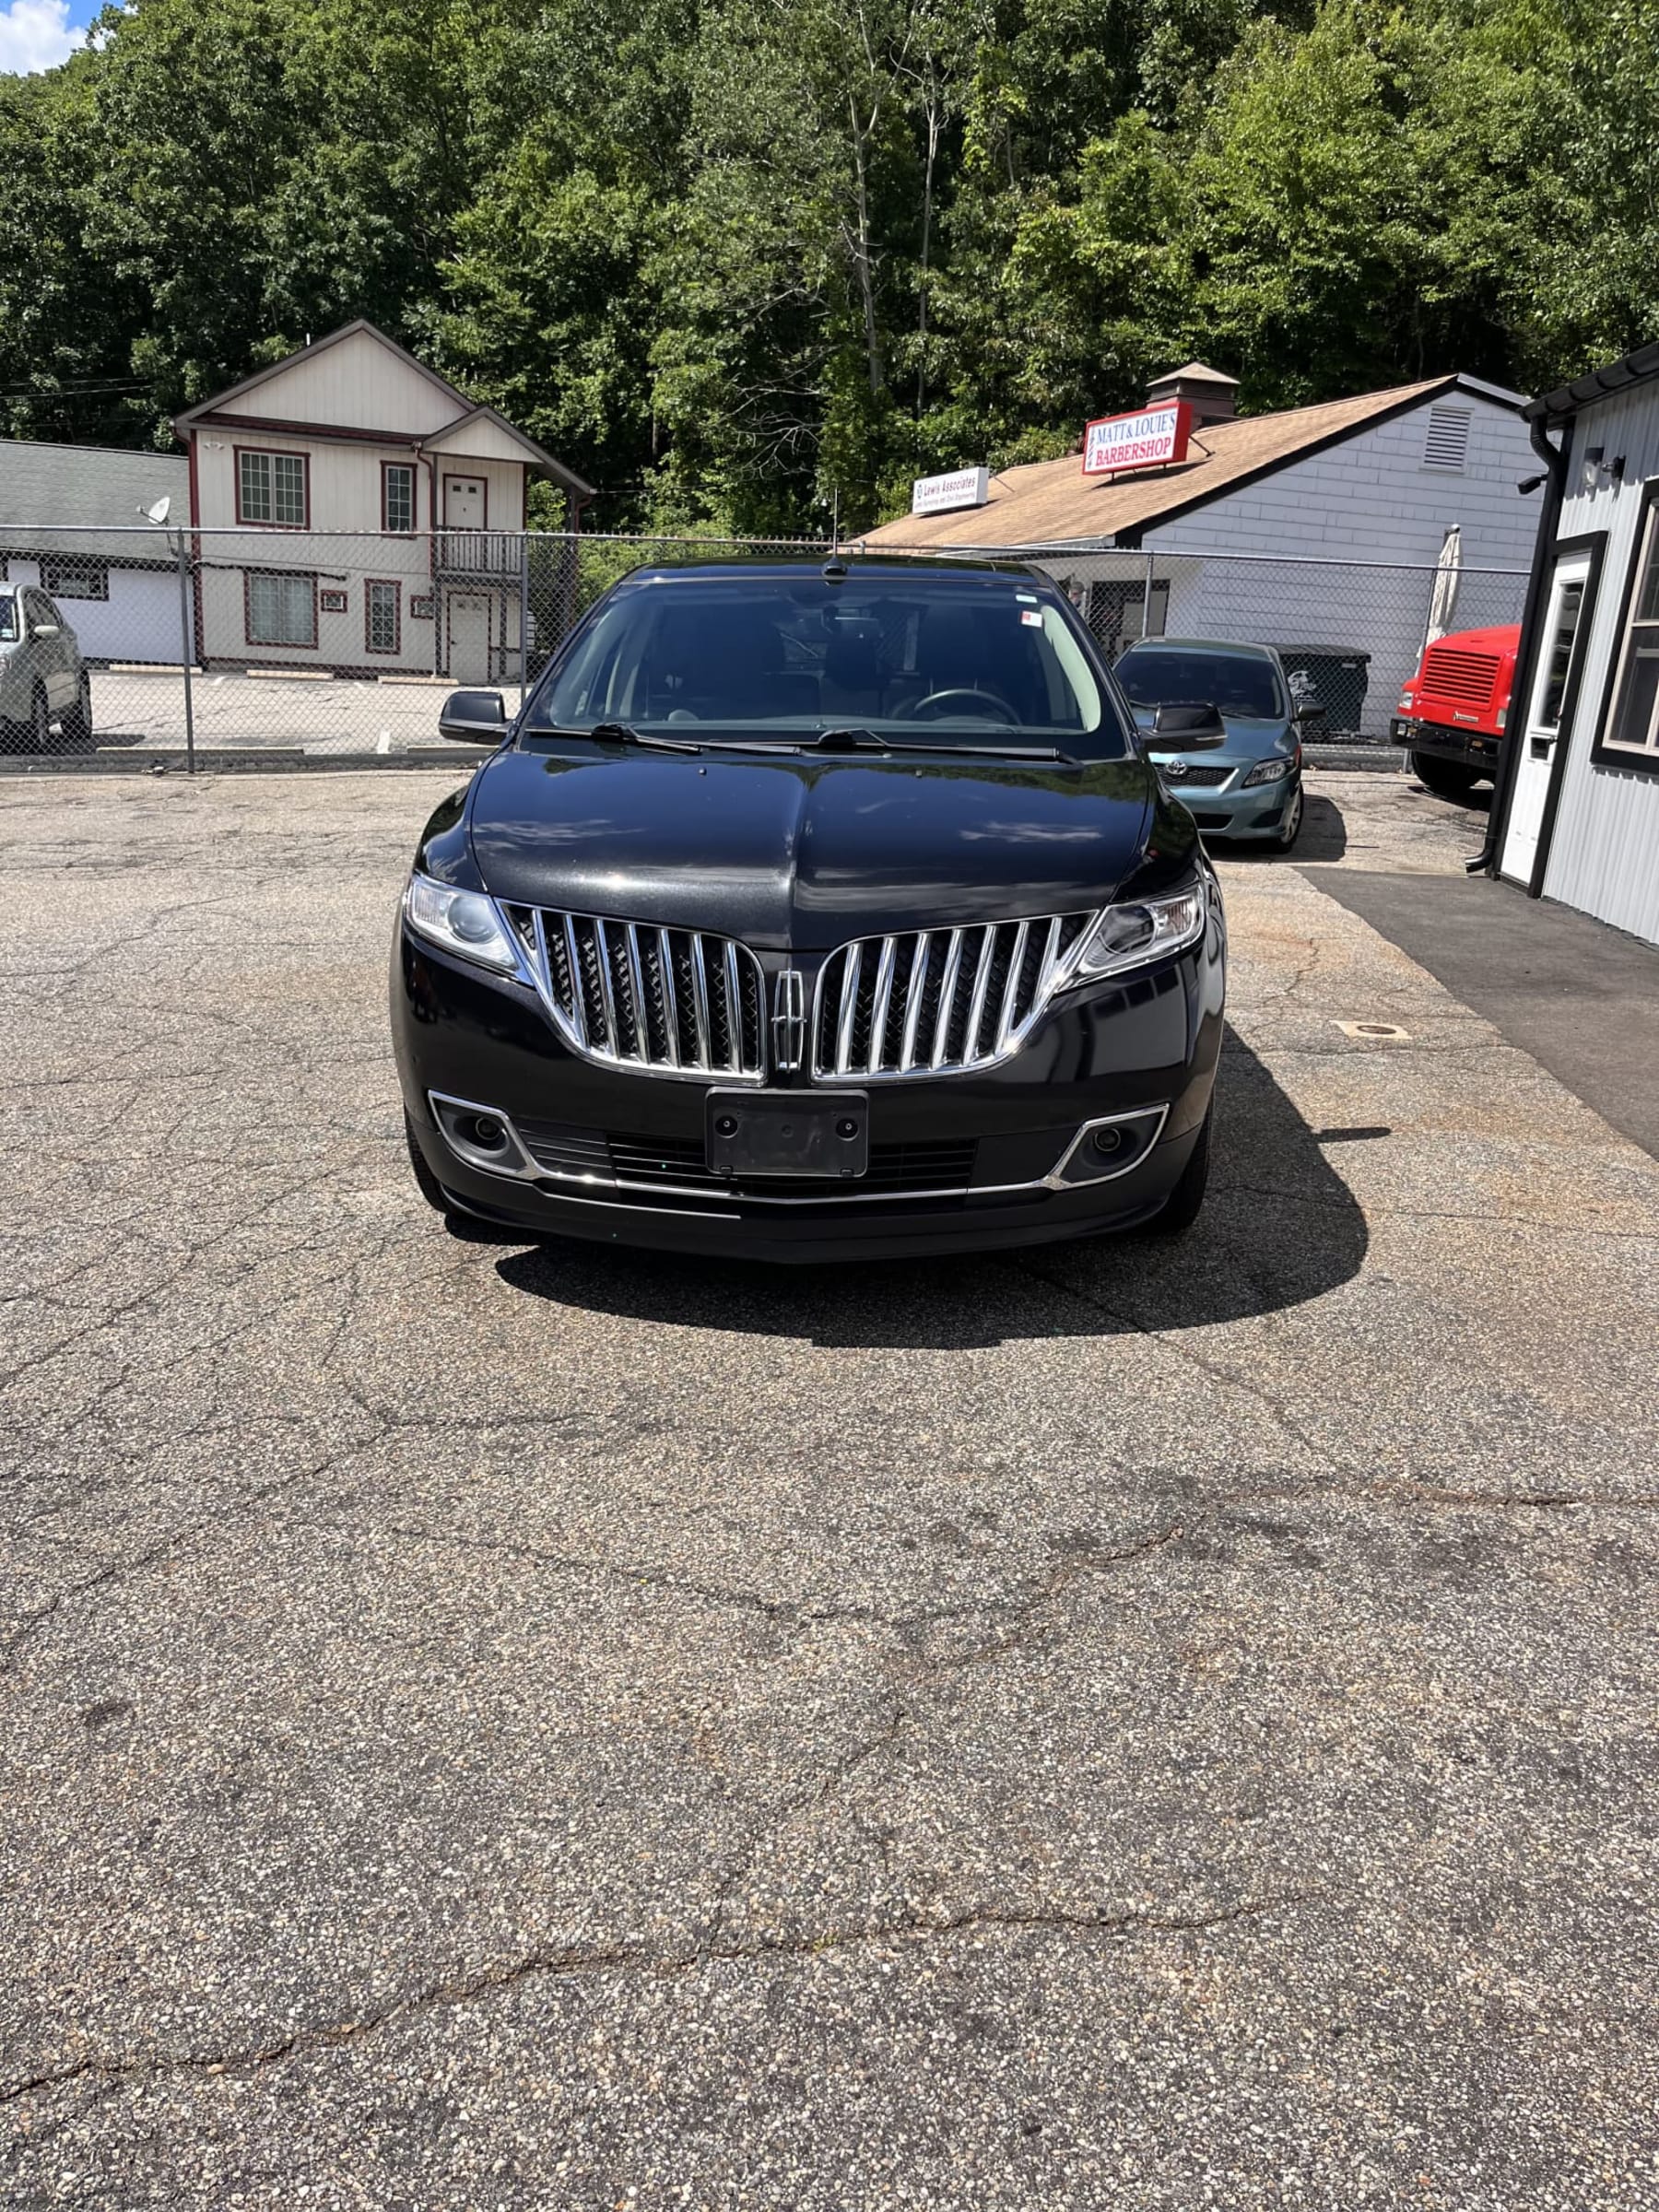 NEW ARRIVAL!! 2013 Lincoln MKX!! One owner car!! Loaded with navigation, backup camera, heated and cooled leather seats, heated steering wheel, AWD, remote start, premium package, Bluetooth , dual panoramic roof and much more! Priced well below retail!! 131k miles! Runs and drives great!! Won’t last at Only $8,900!!